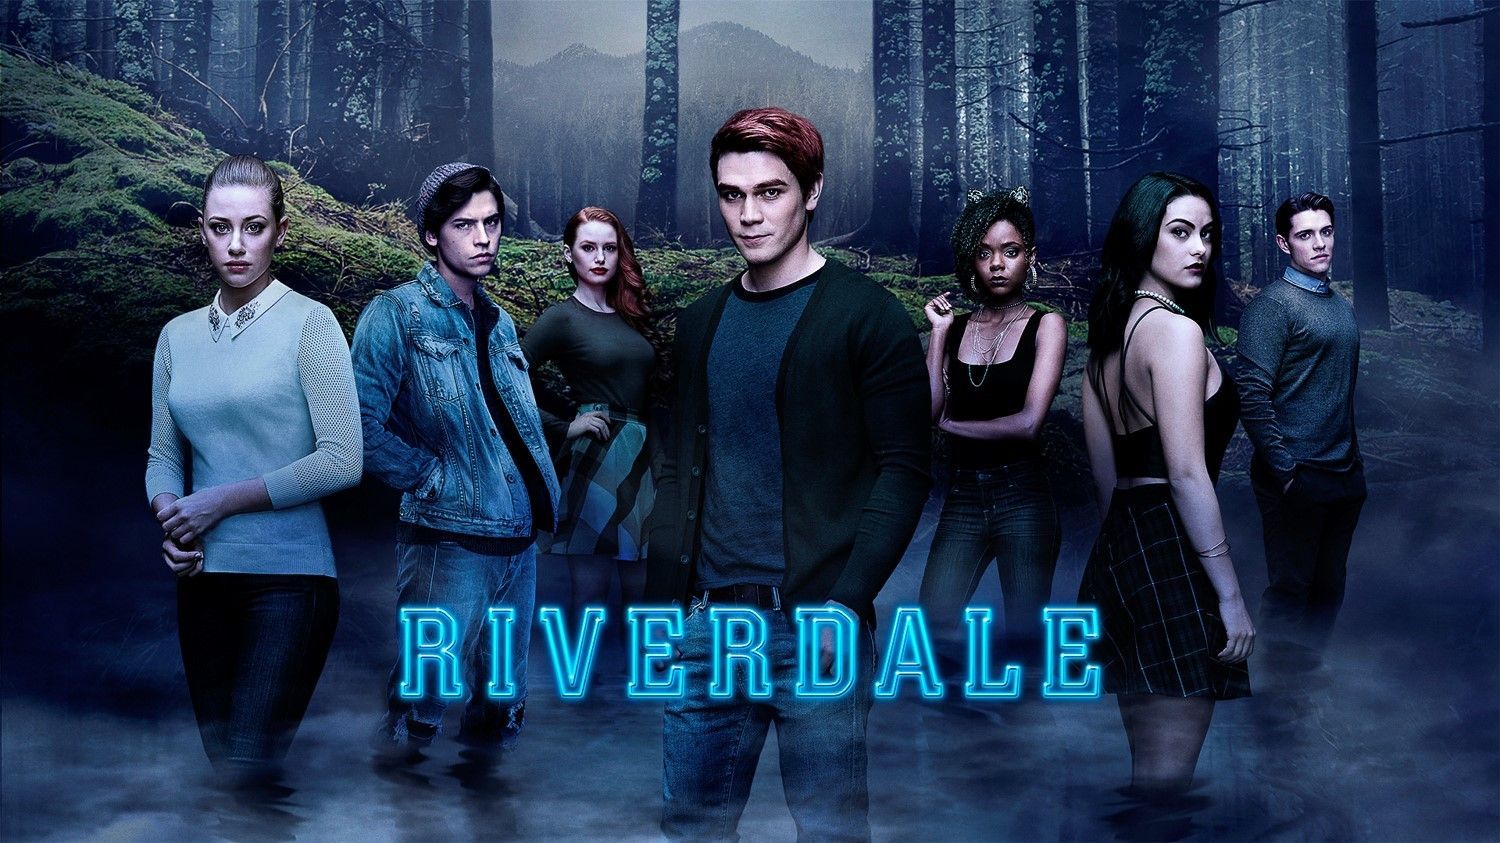 Riverdale characters Poster Wallpaper ID3498